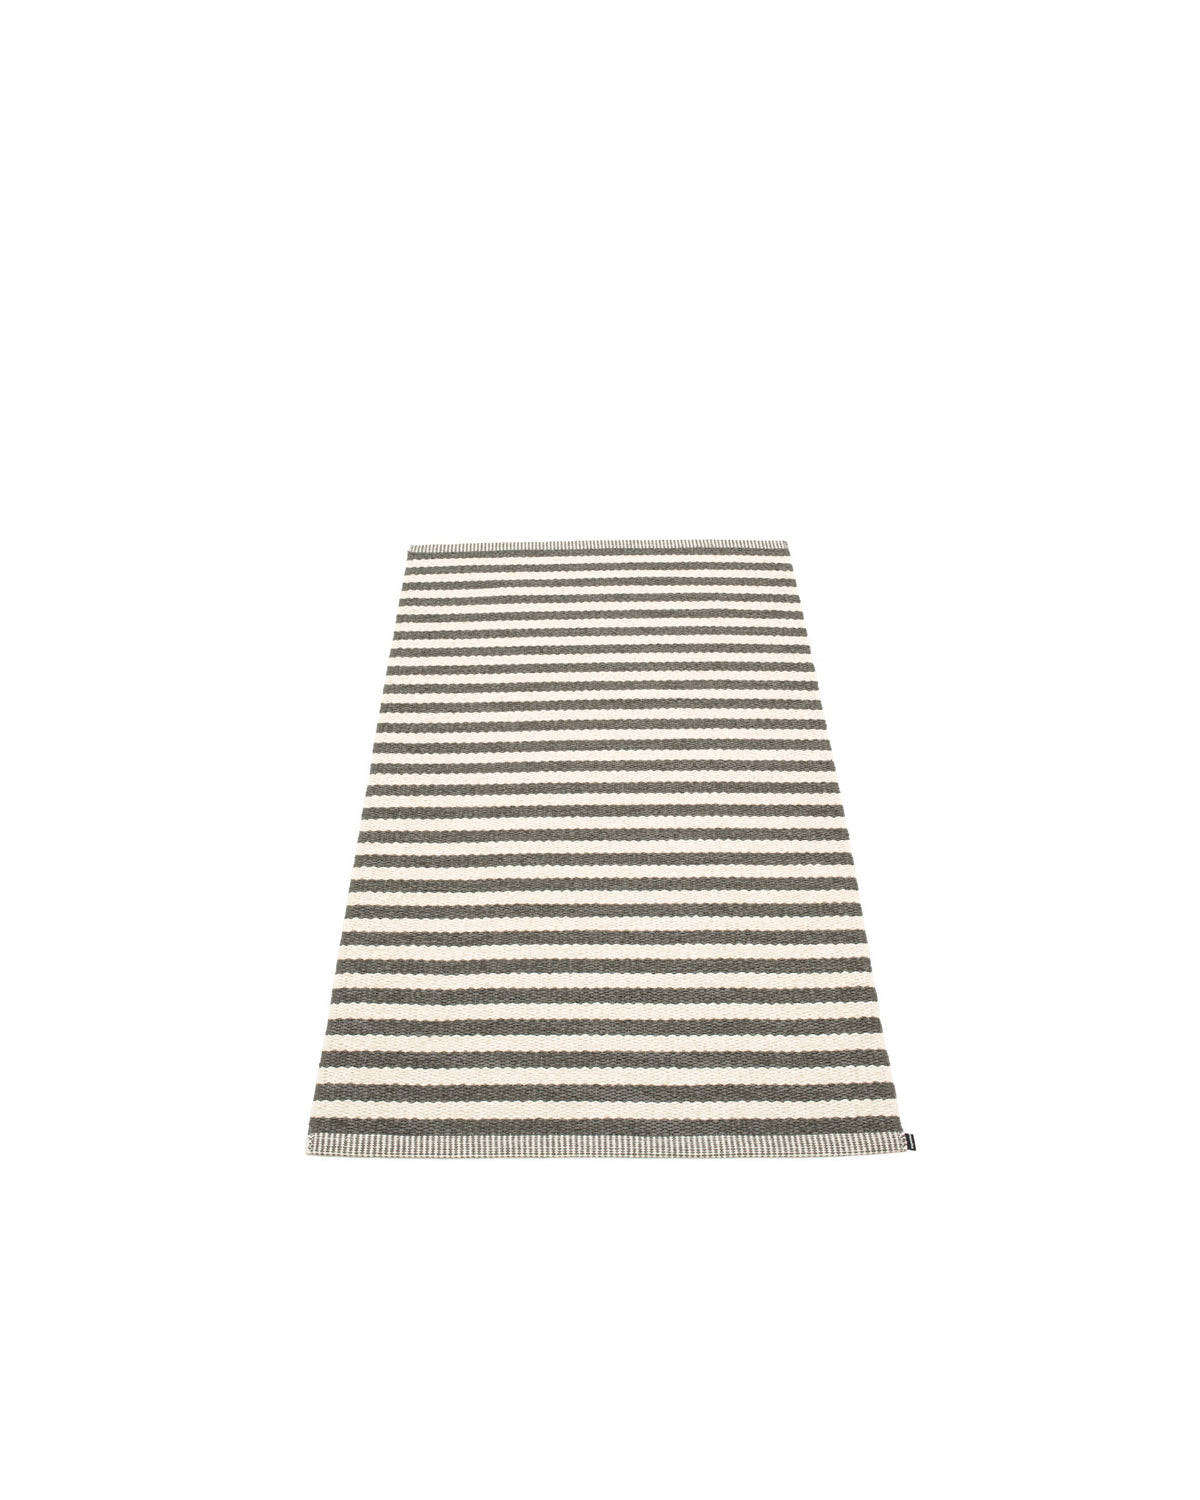 Pappelina Rug DUO Charcoal  image 1